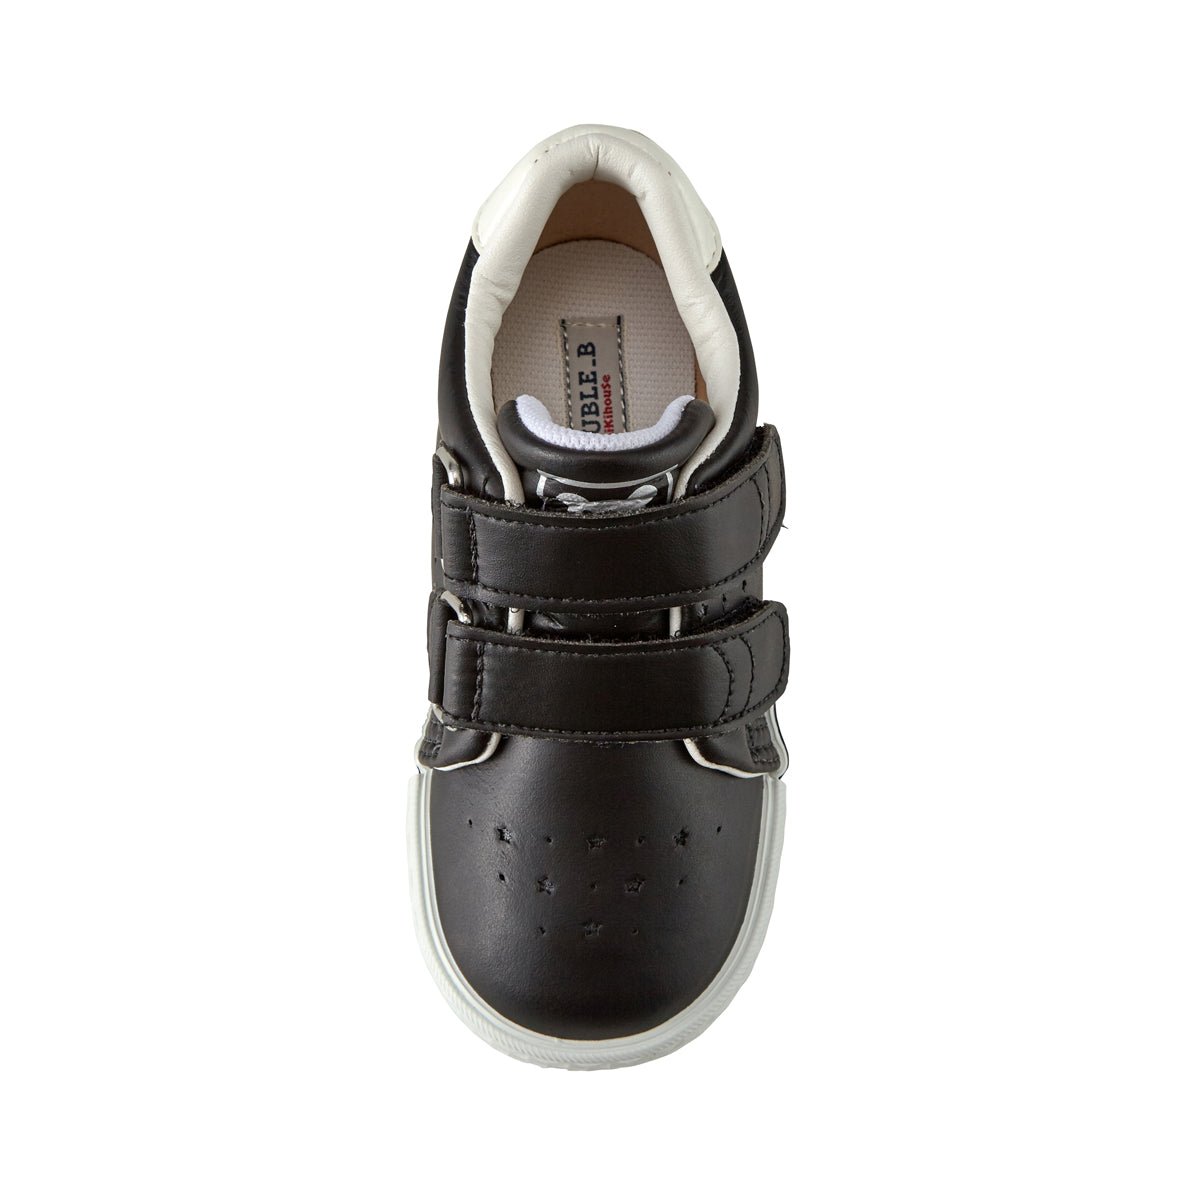 DOUBLE_B Soft Leather Shoes for Kids - 61-9405-979-05-15